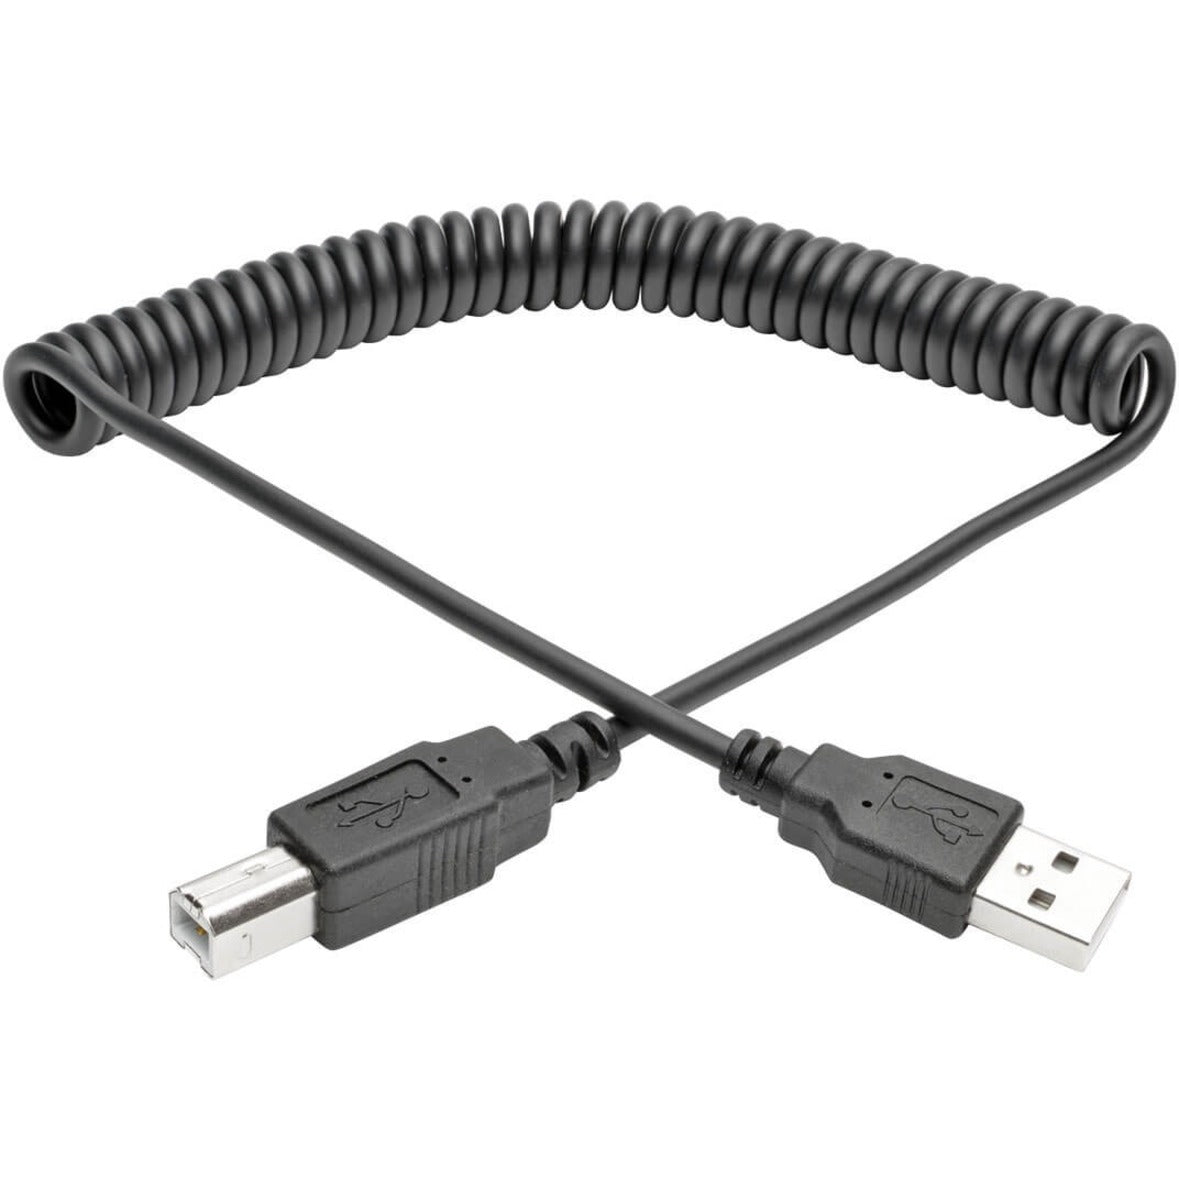 Tripp Lite U022-010-COIL USB 2.0 Hi-Speed A/B Coiled Cable (M/M), 10 ft, Flexible, Strain Relief, Noise Protection, EMI/RF Protection